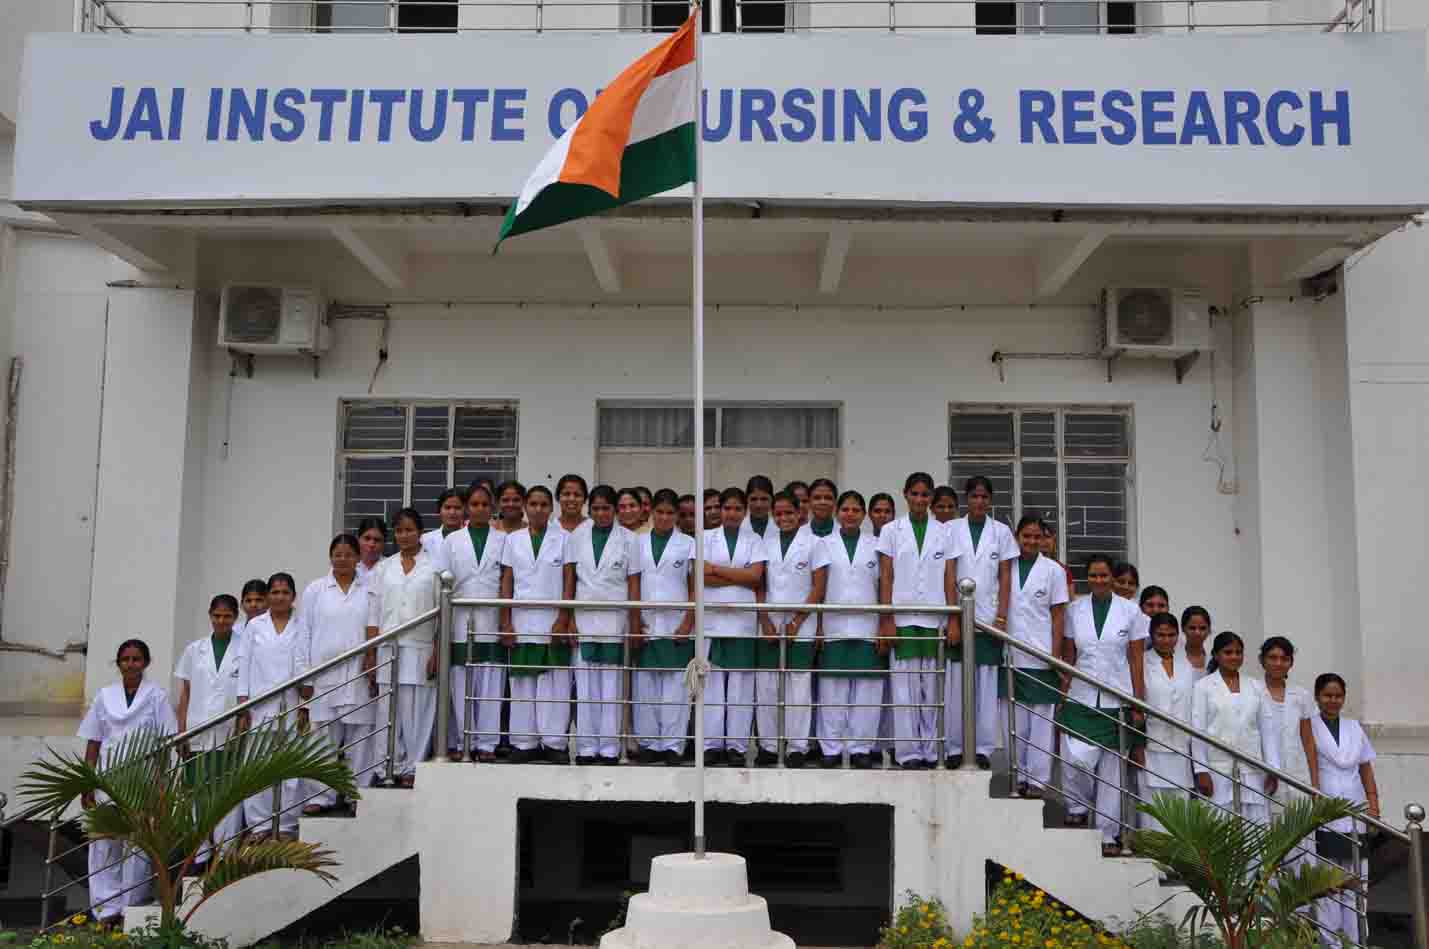 Jai Institute of Nursing and Research - JINR, Gwalior Image